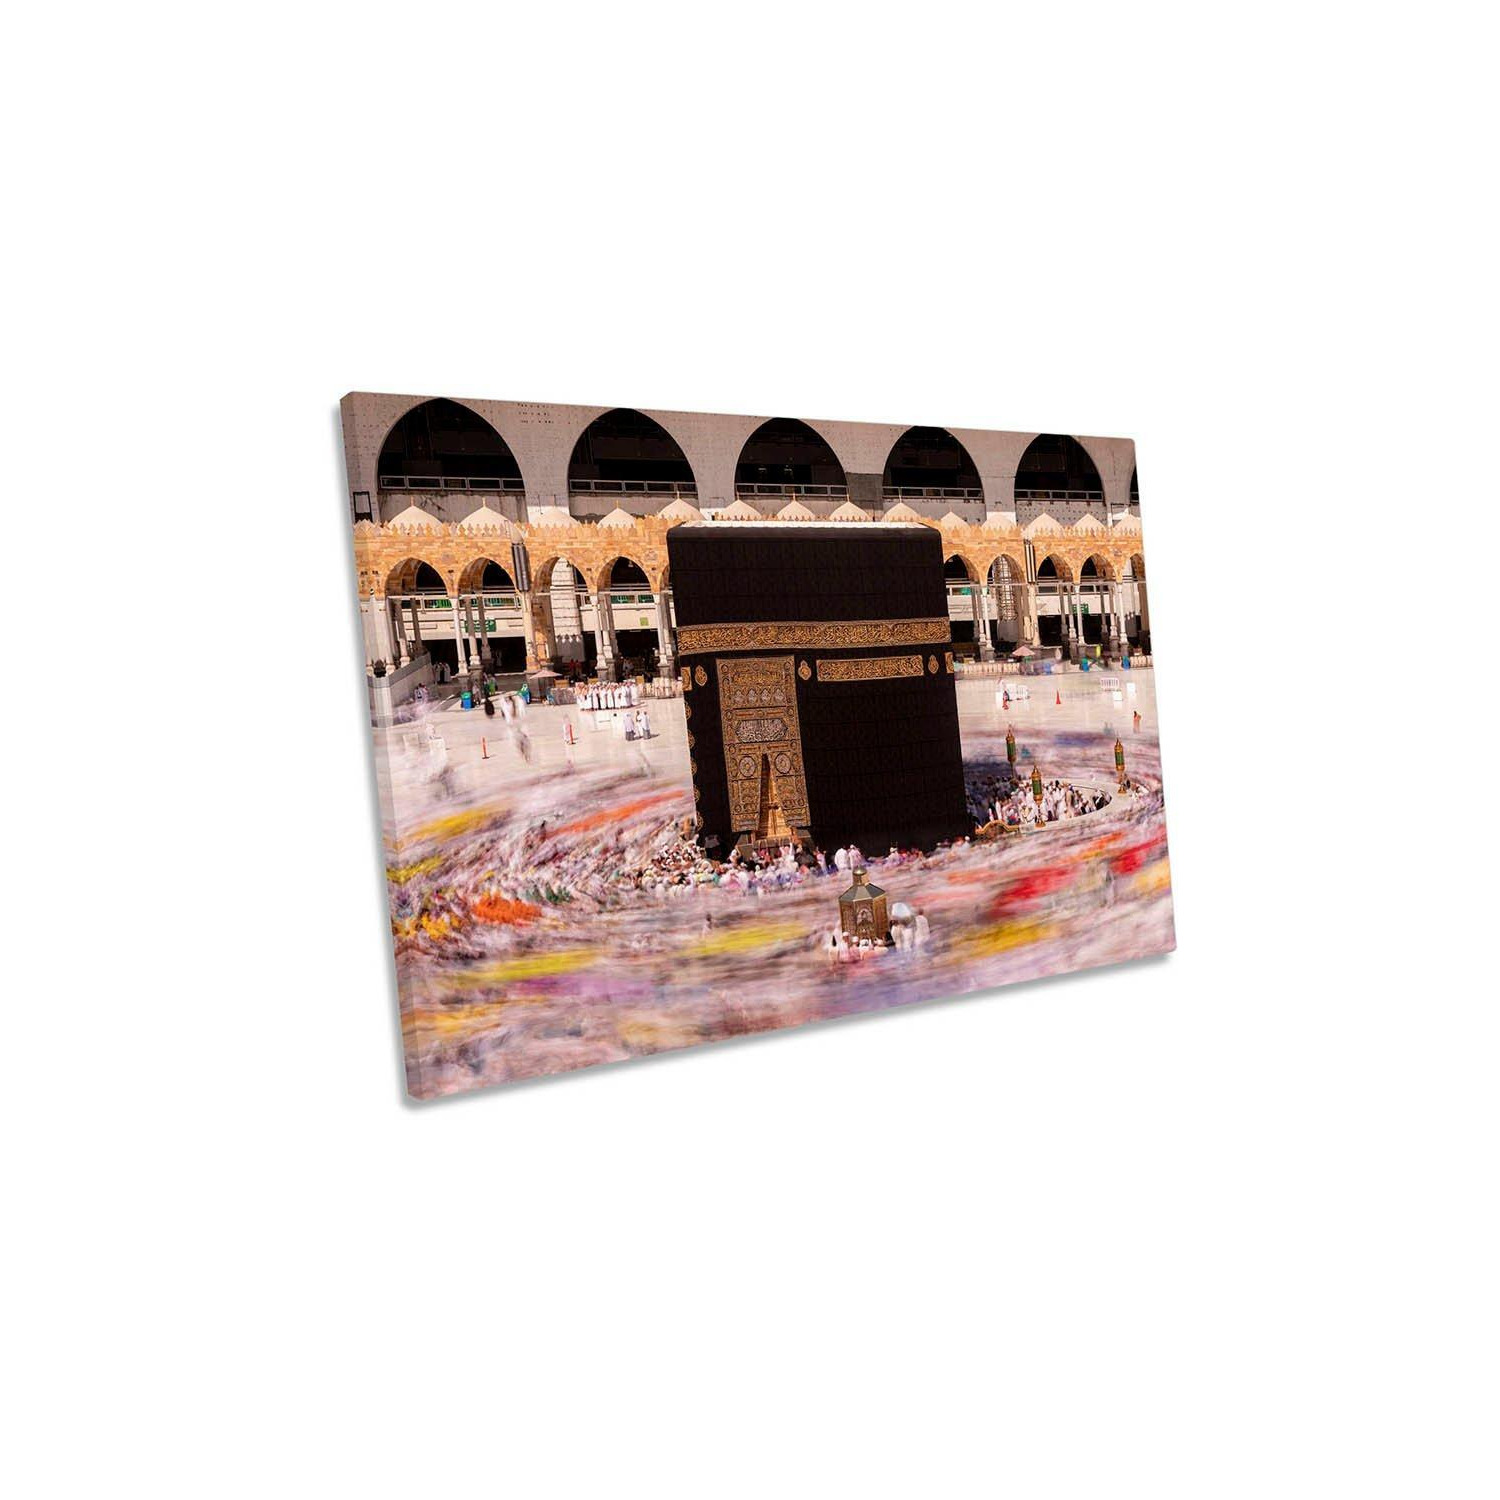 Holy Mosque Makkah Mecca Religion Canvas Wall Art Picture Print - image 1